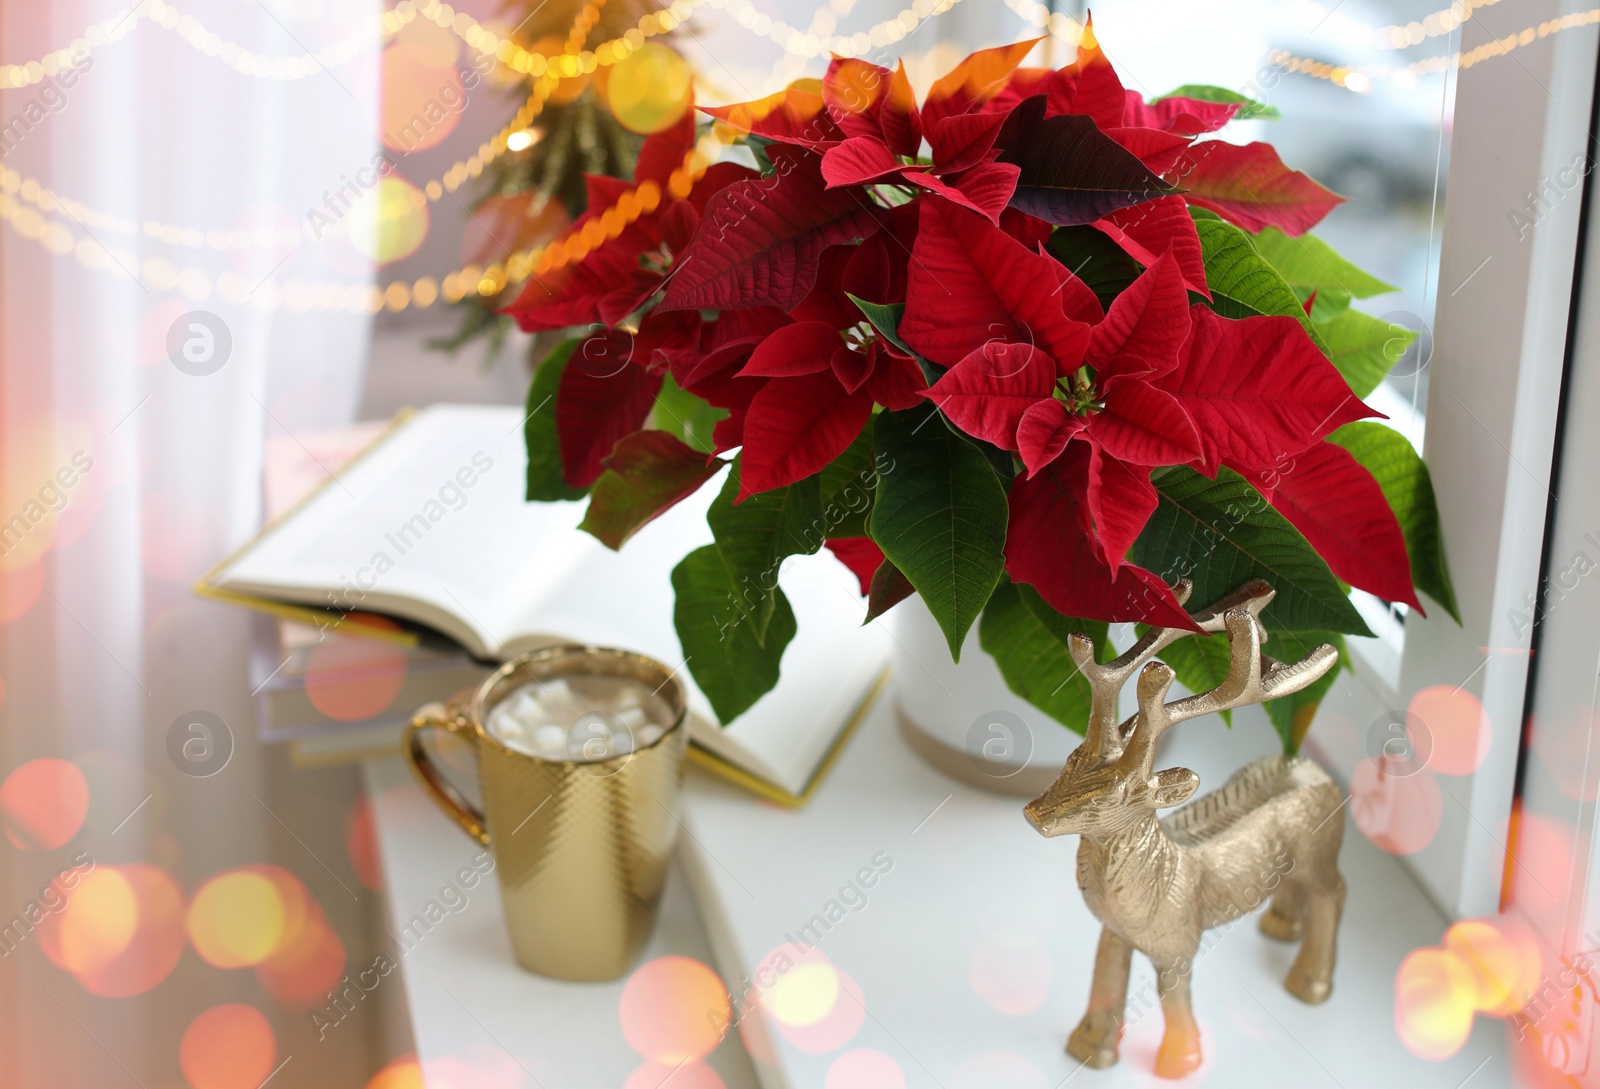 Image of Traditional Christmas poinsettia near window. Bokeh effect on foreground